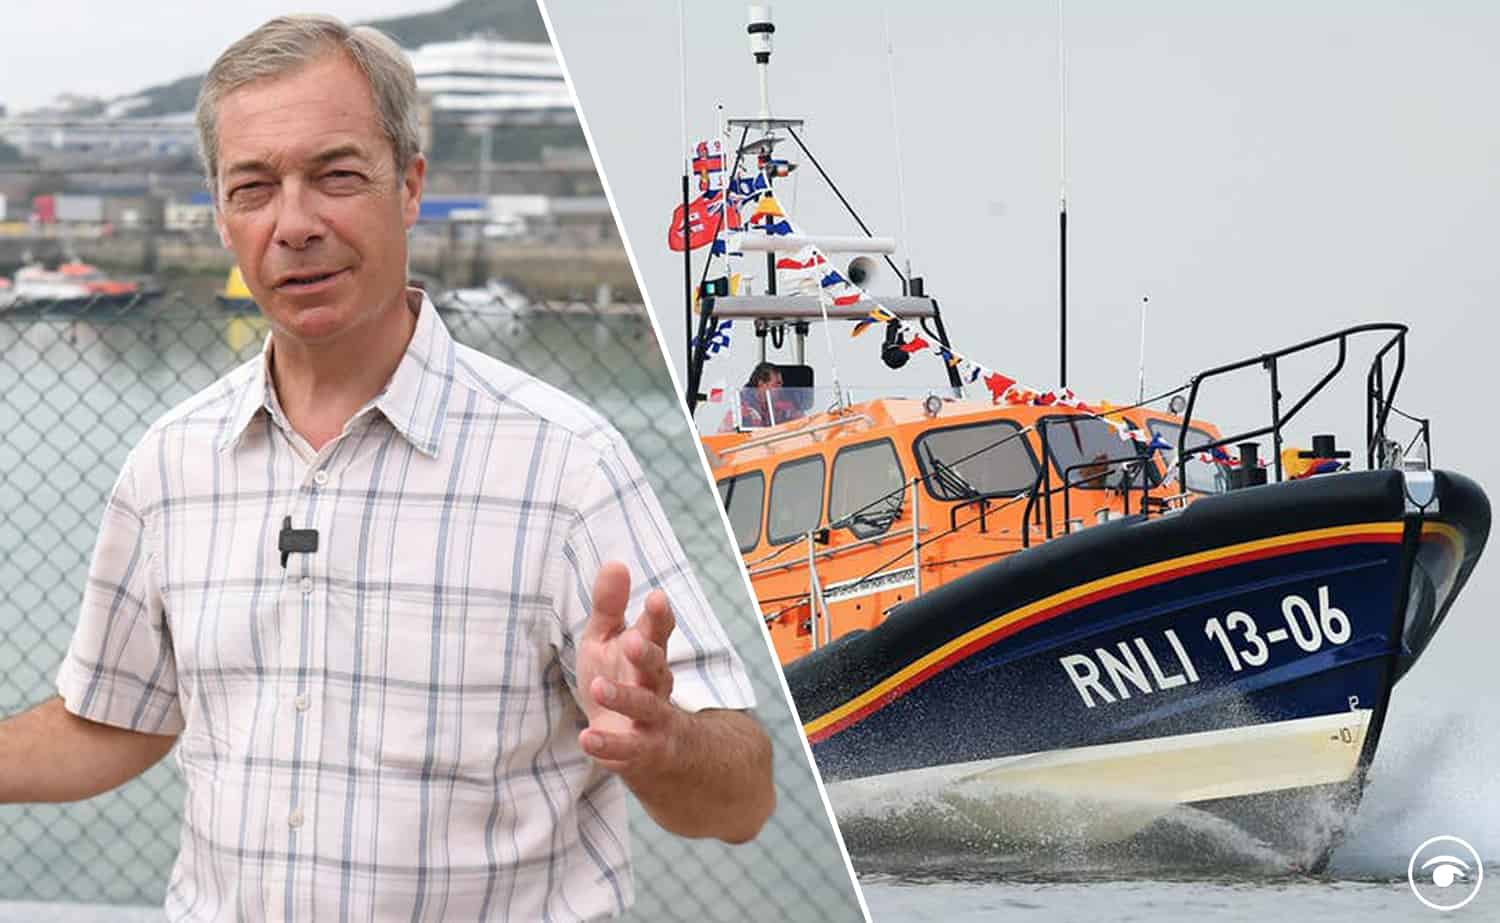 RNLI hits back after Farage calls it a ‘taxi service for illegal immigrants’